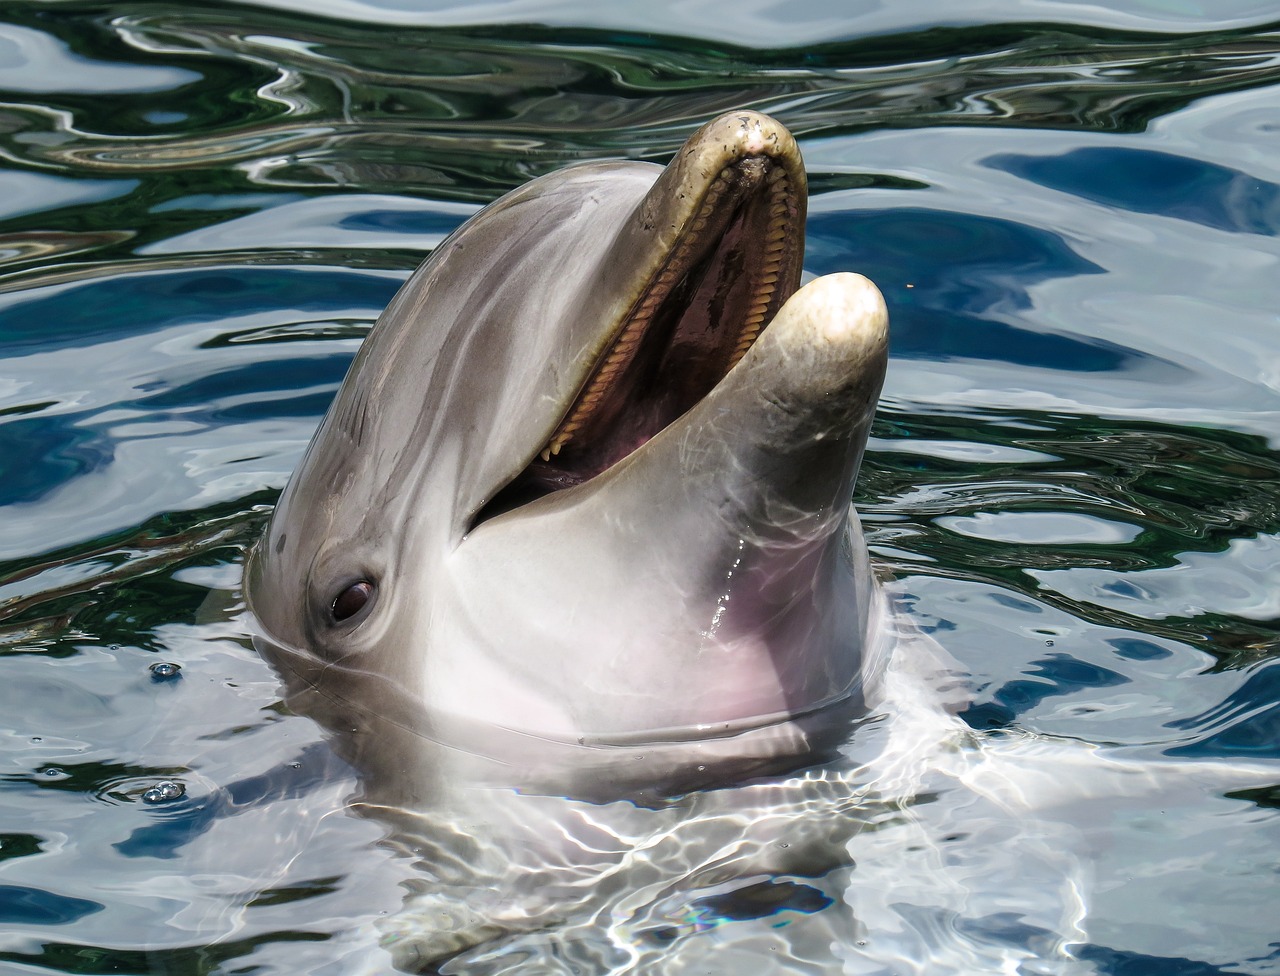 a close up of a dolphin in a body of water, a portrait, shutterstock, hurufiyya, waving and smiling, closeup photo, flash photo, tourist photo